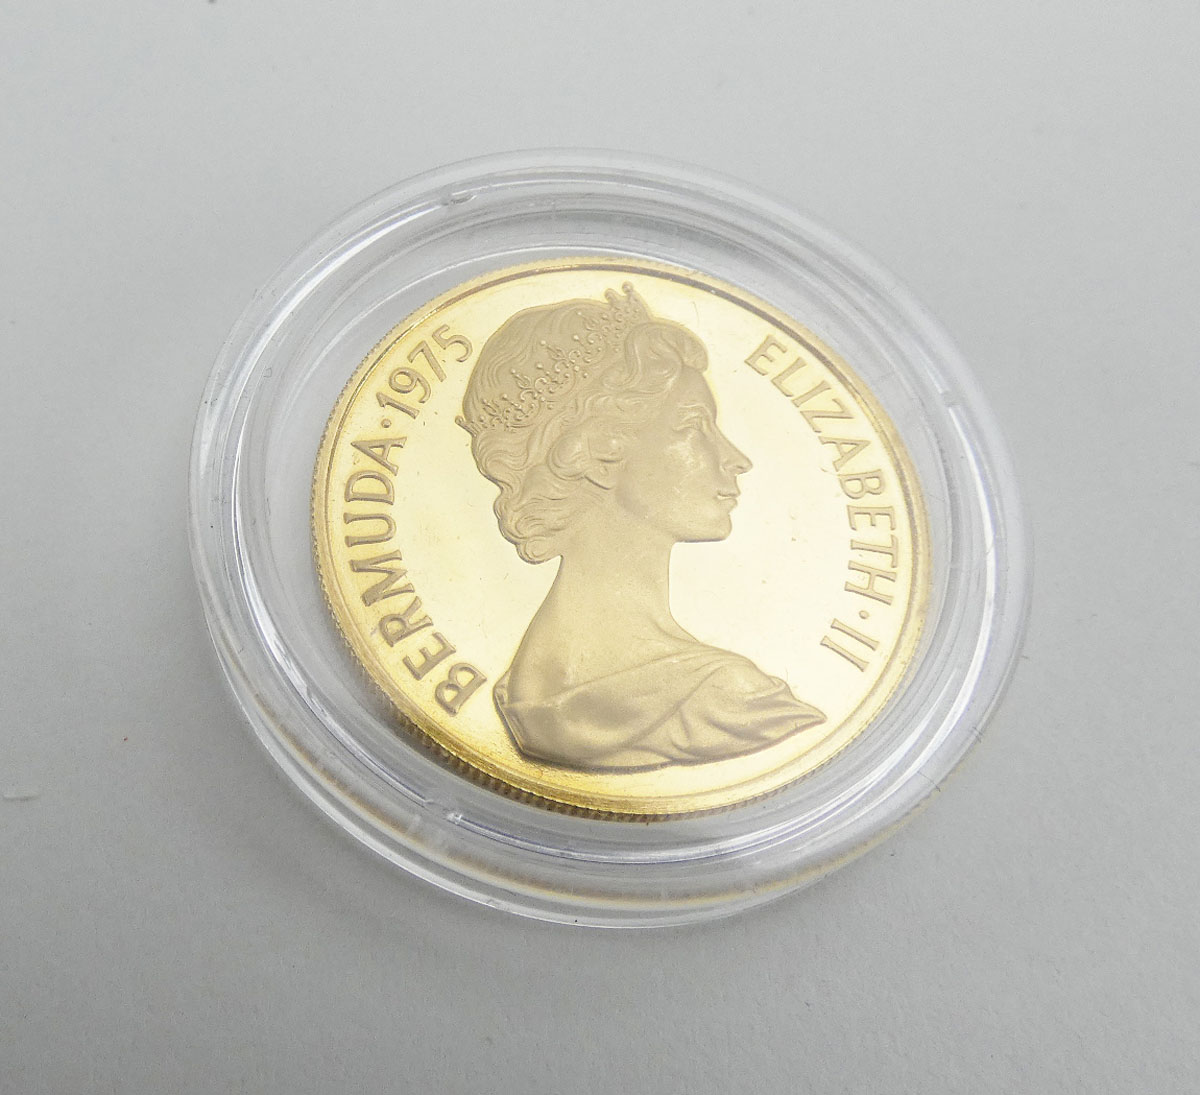 A 22ct yellow gold $100 coin commemorating the Royal visit to Bermuda in 1975, - Image 2 of 2